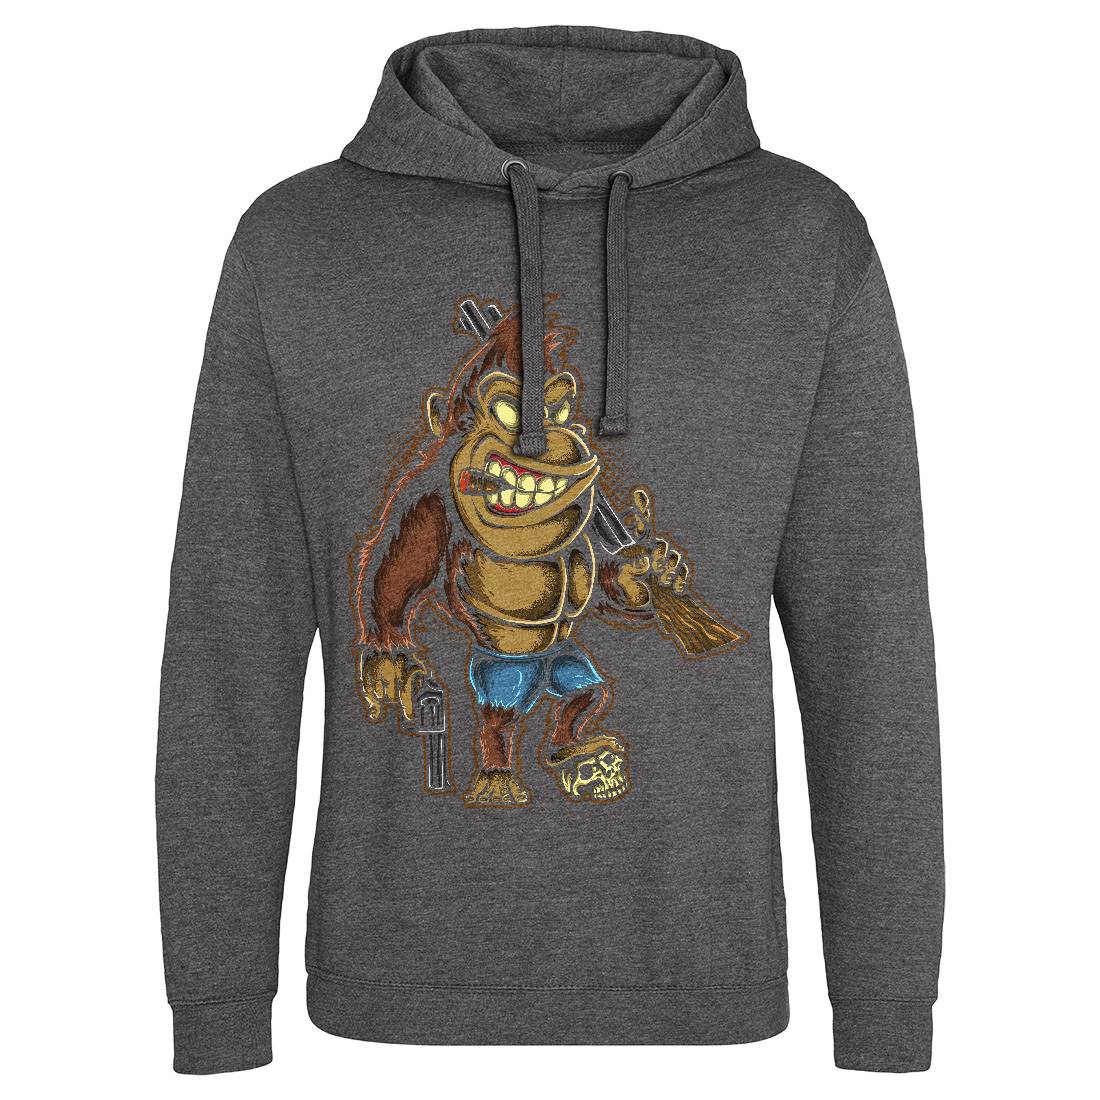 Killer Kong Mens Hoodie Without Pocket Animals A429